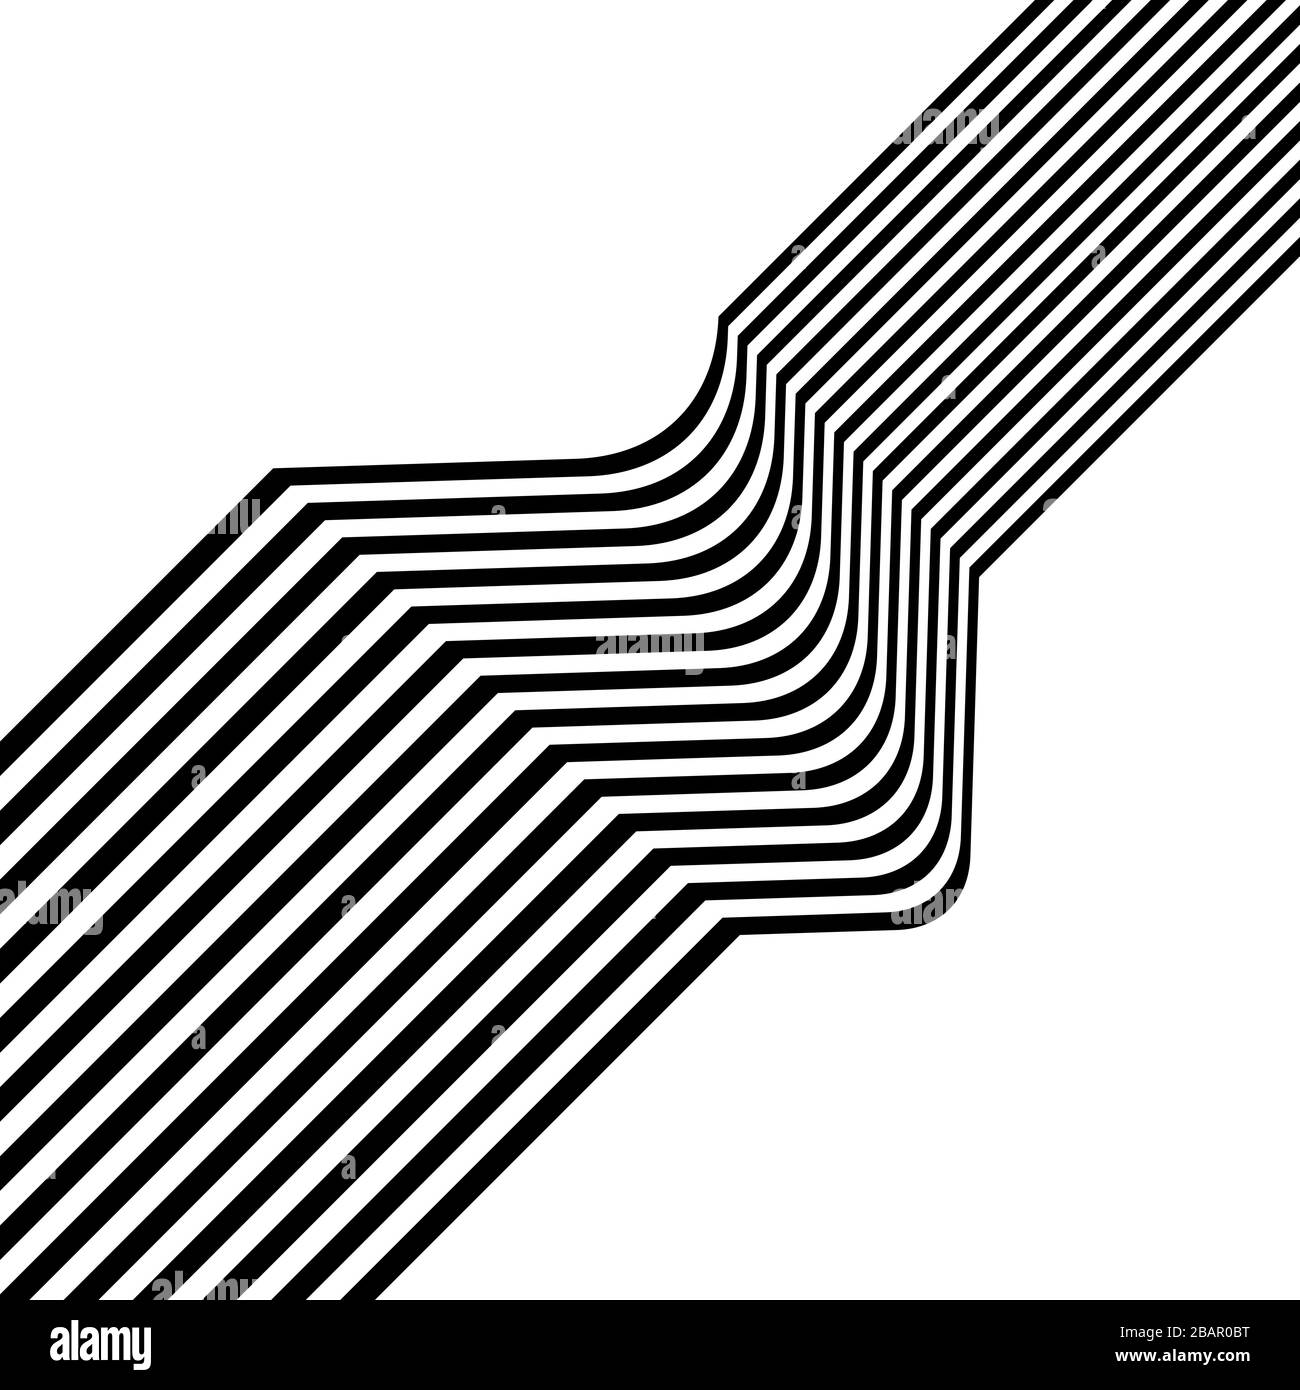 Black and white movement pattern Stock Vector Images - Alamy